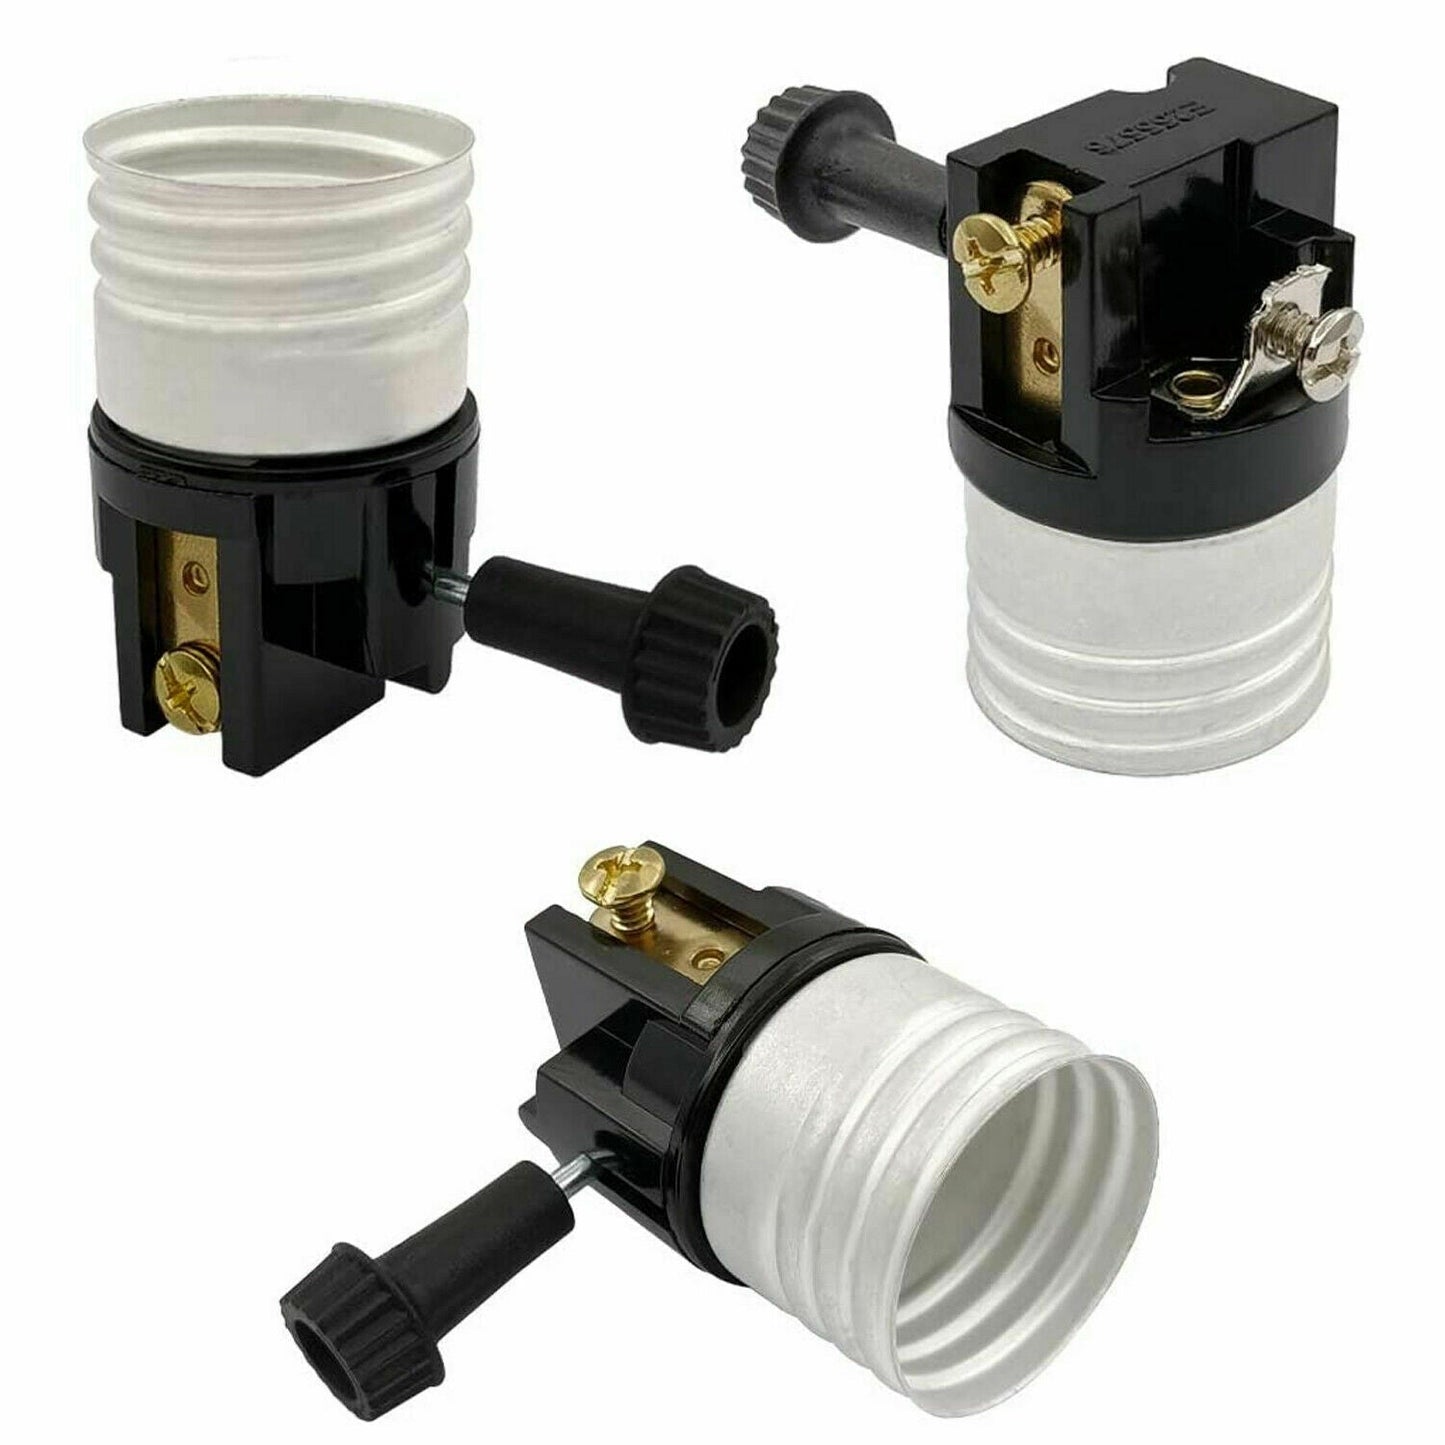 3 Way Socket Replacement for lamp Removeable Turn Knob